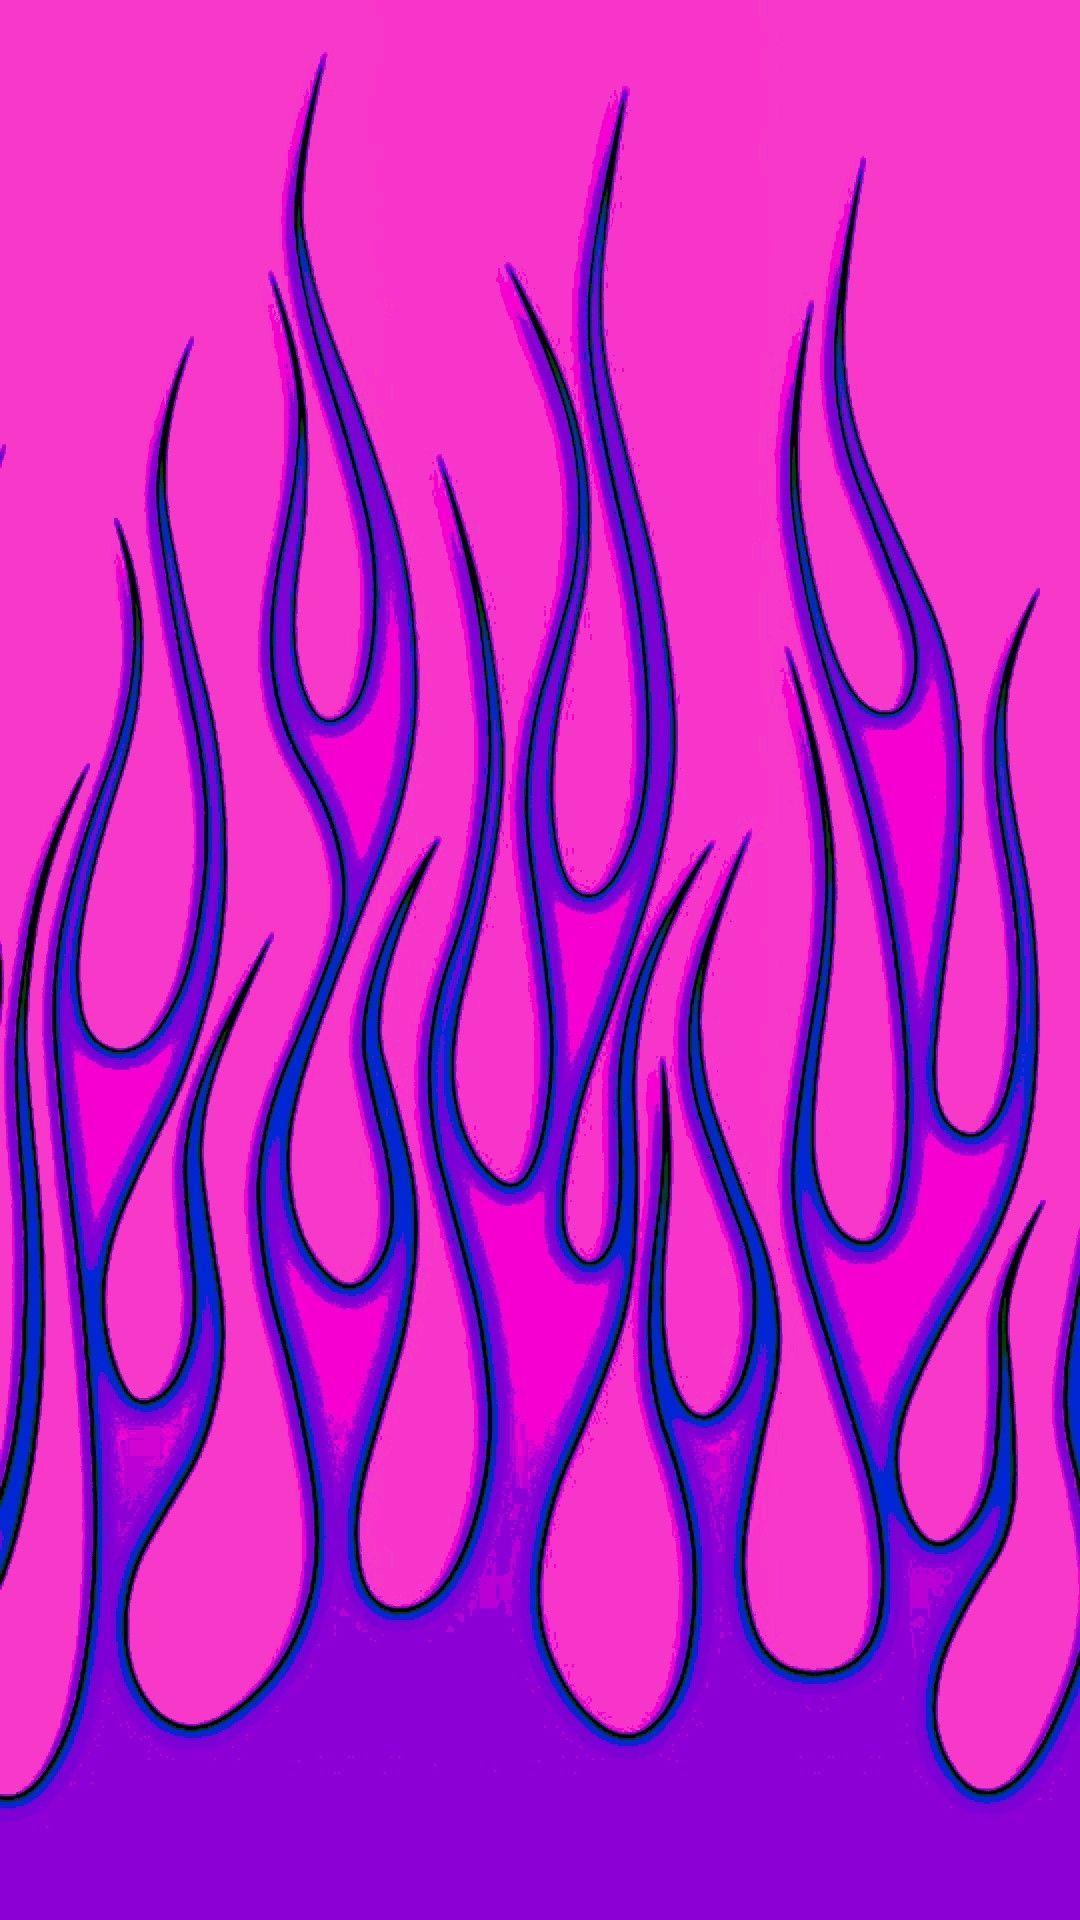 Pink Flame Wallpaper Aesthetic